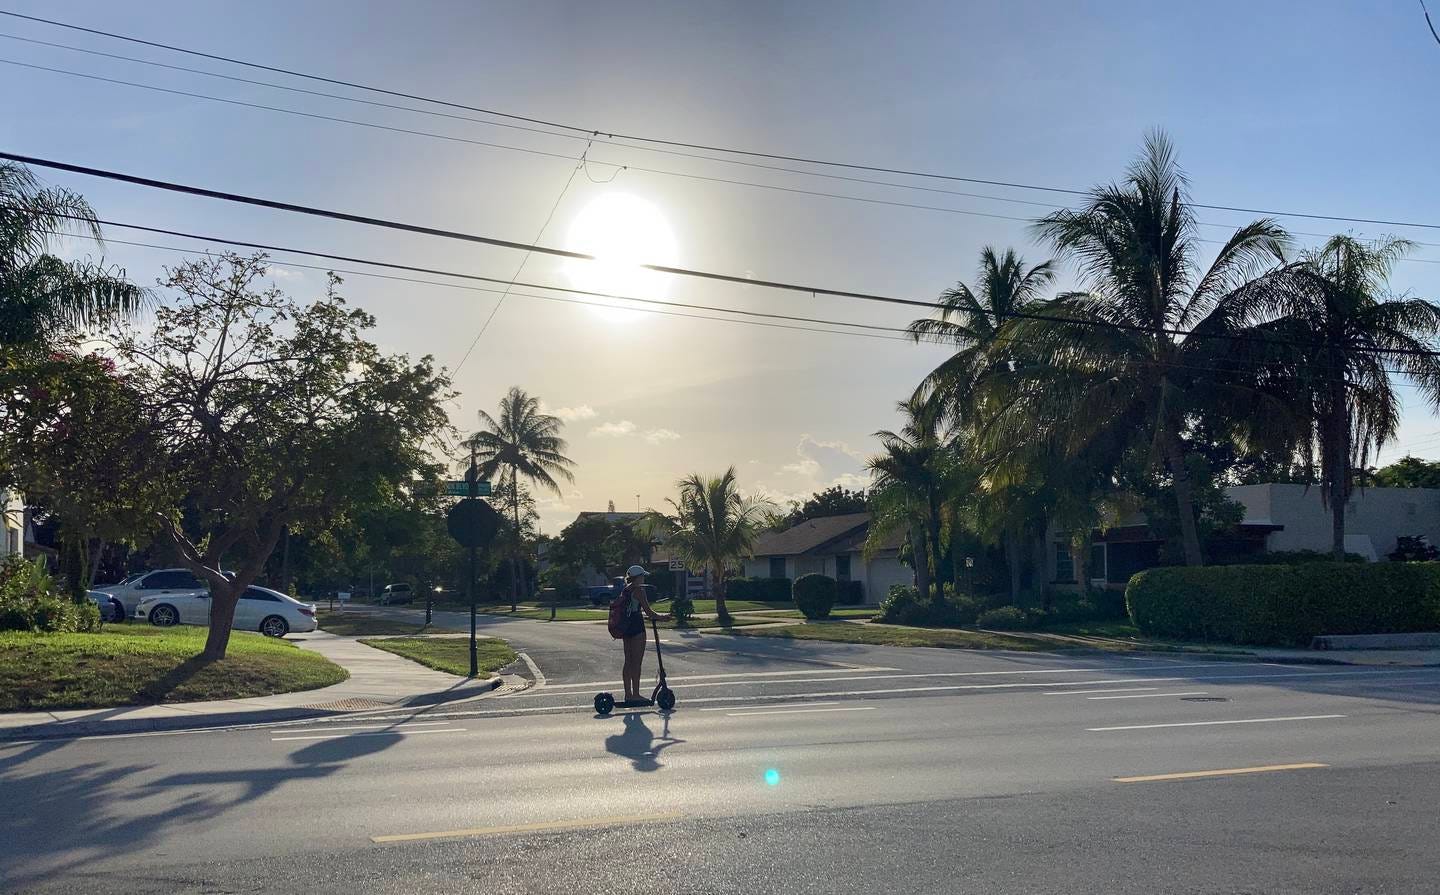 A woman rides an electric scooter on Northwest Second Avenue heading north in the general direction of Florida Atlantic University on Thursday evening. She was seen leaving downtown Boca Raton along Palmetto Park Road. (Kathy Laskowski/South Florida Sun Sentinel)